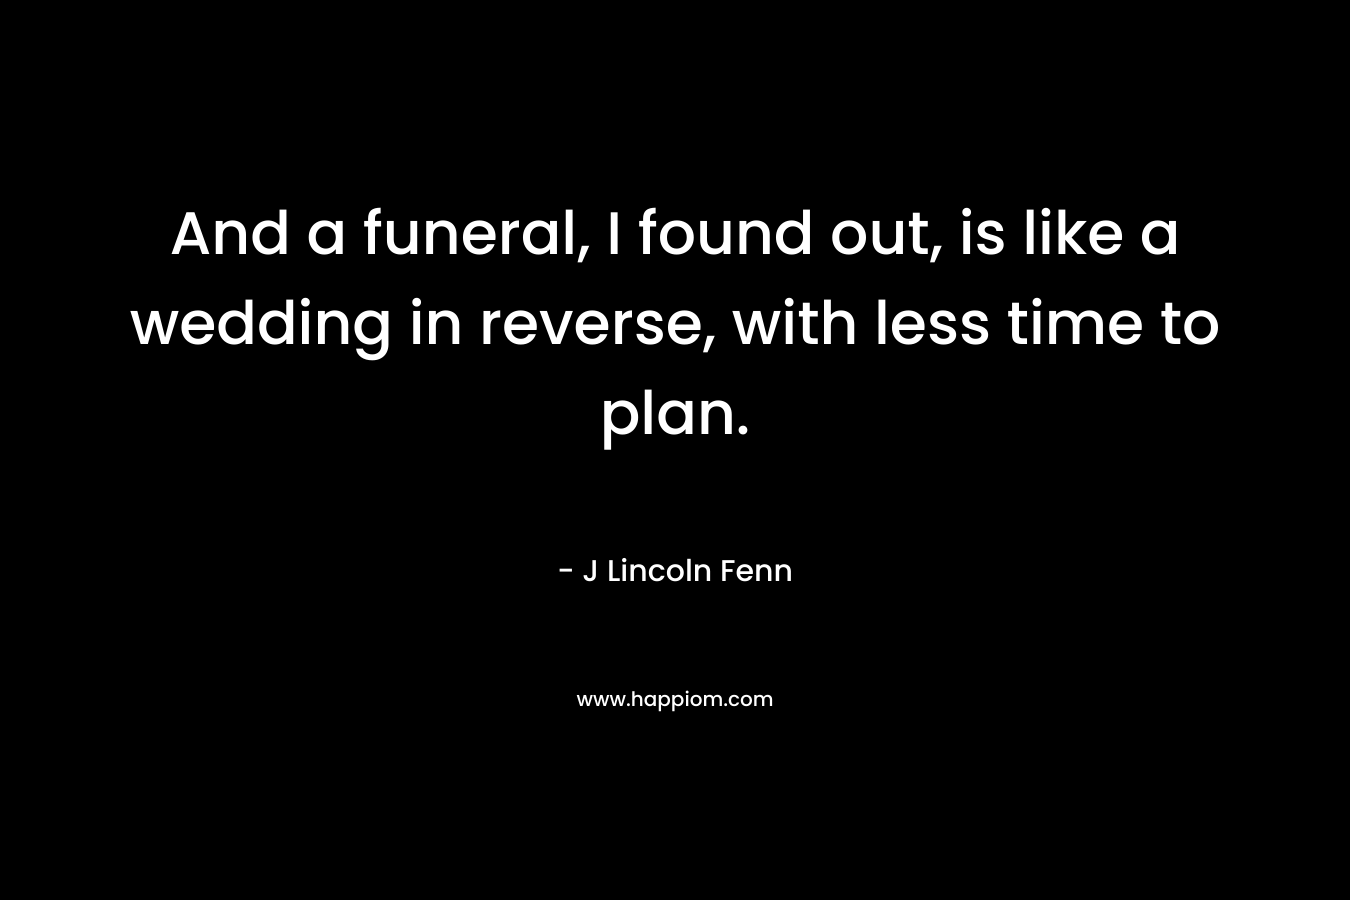 And a funeral, I found out, is like a wedding in reverse, with less time to plan. – J Lincoln Fenn